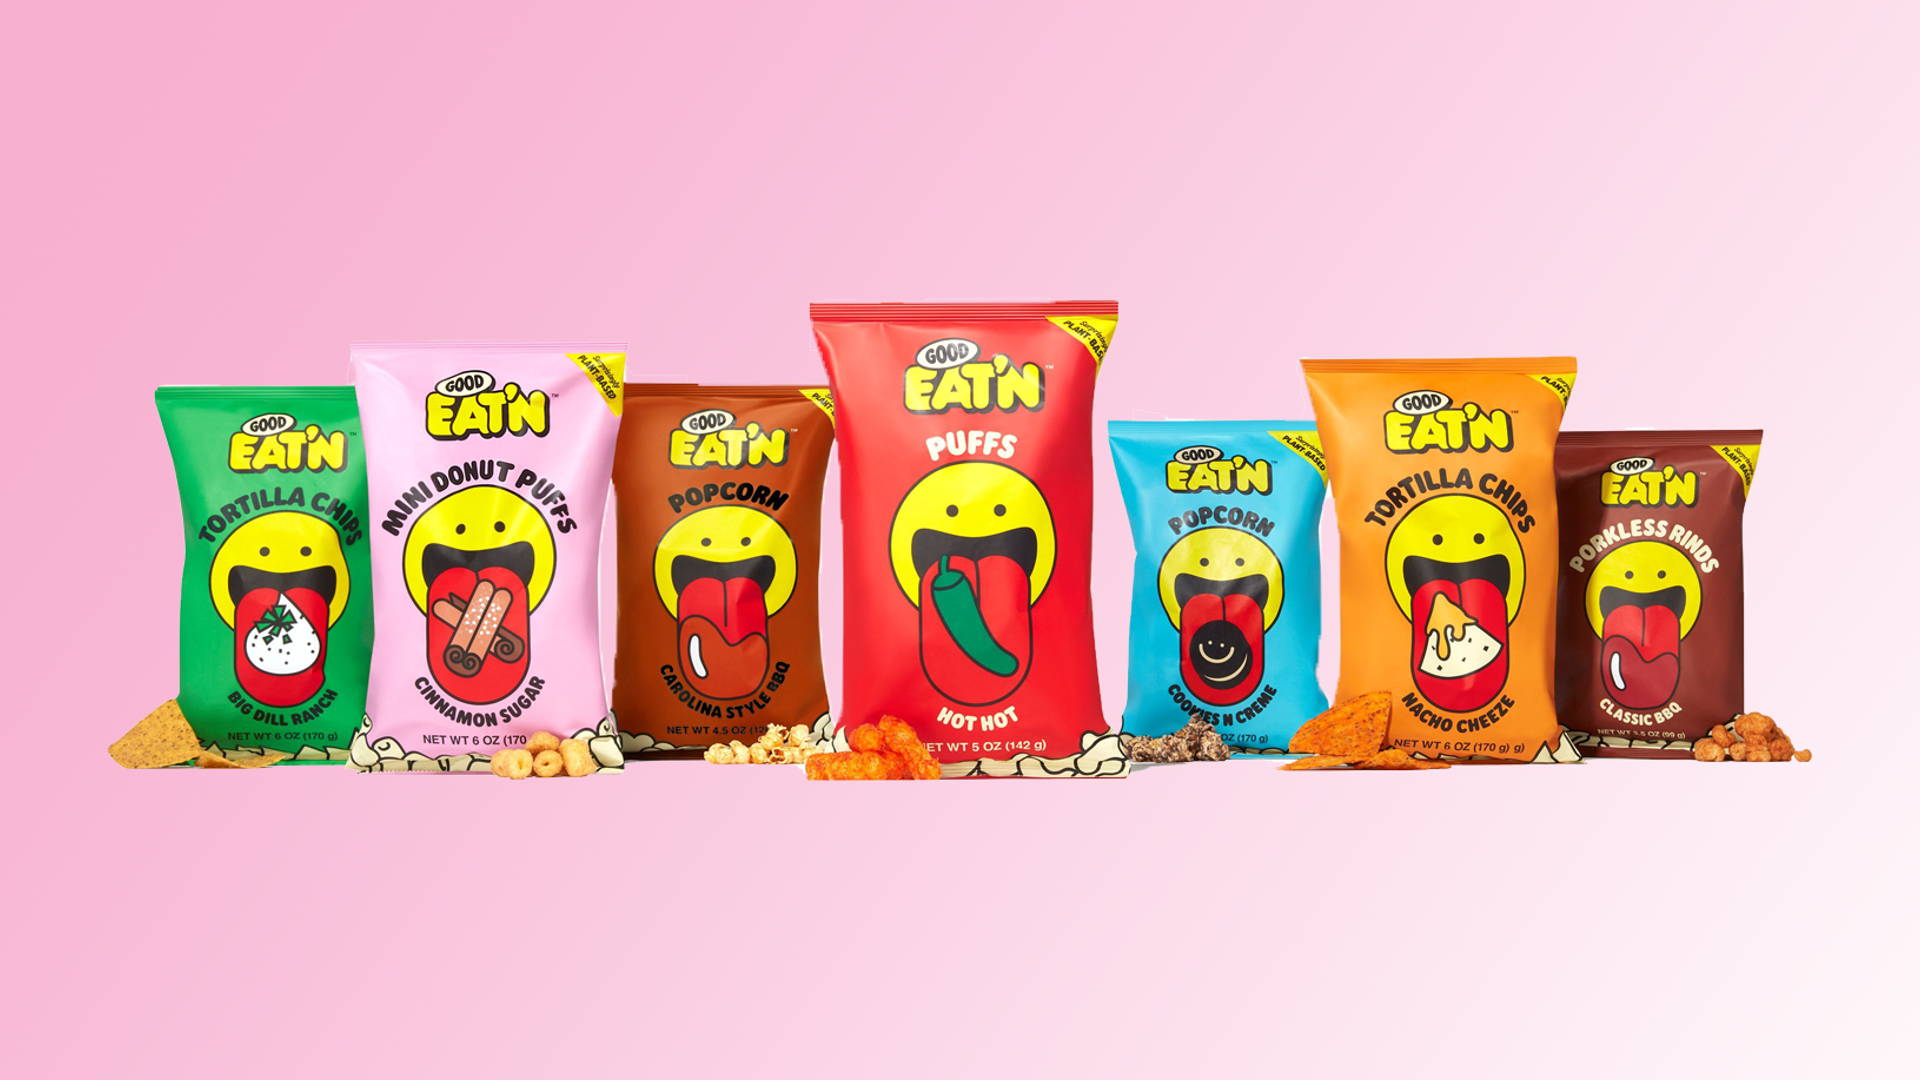 Featured image for Chris Paul and Gopuff Launch Plant-Based Snack 'Good Eat'n' With Design From Utendahl Creative